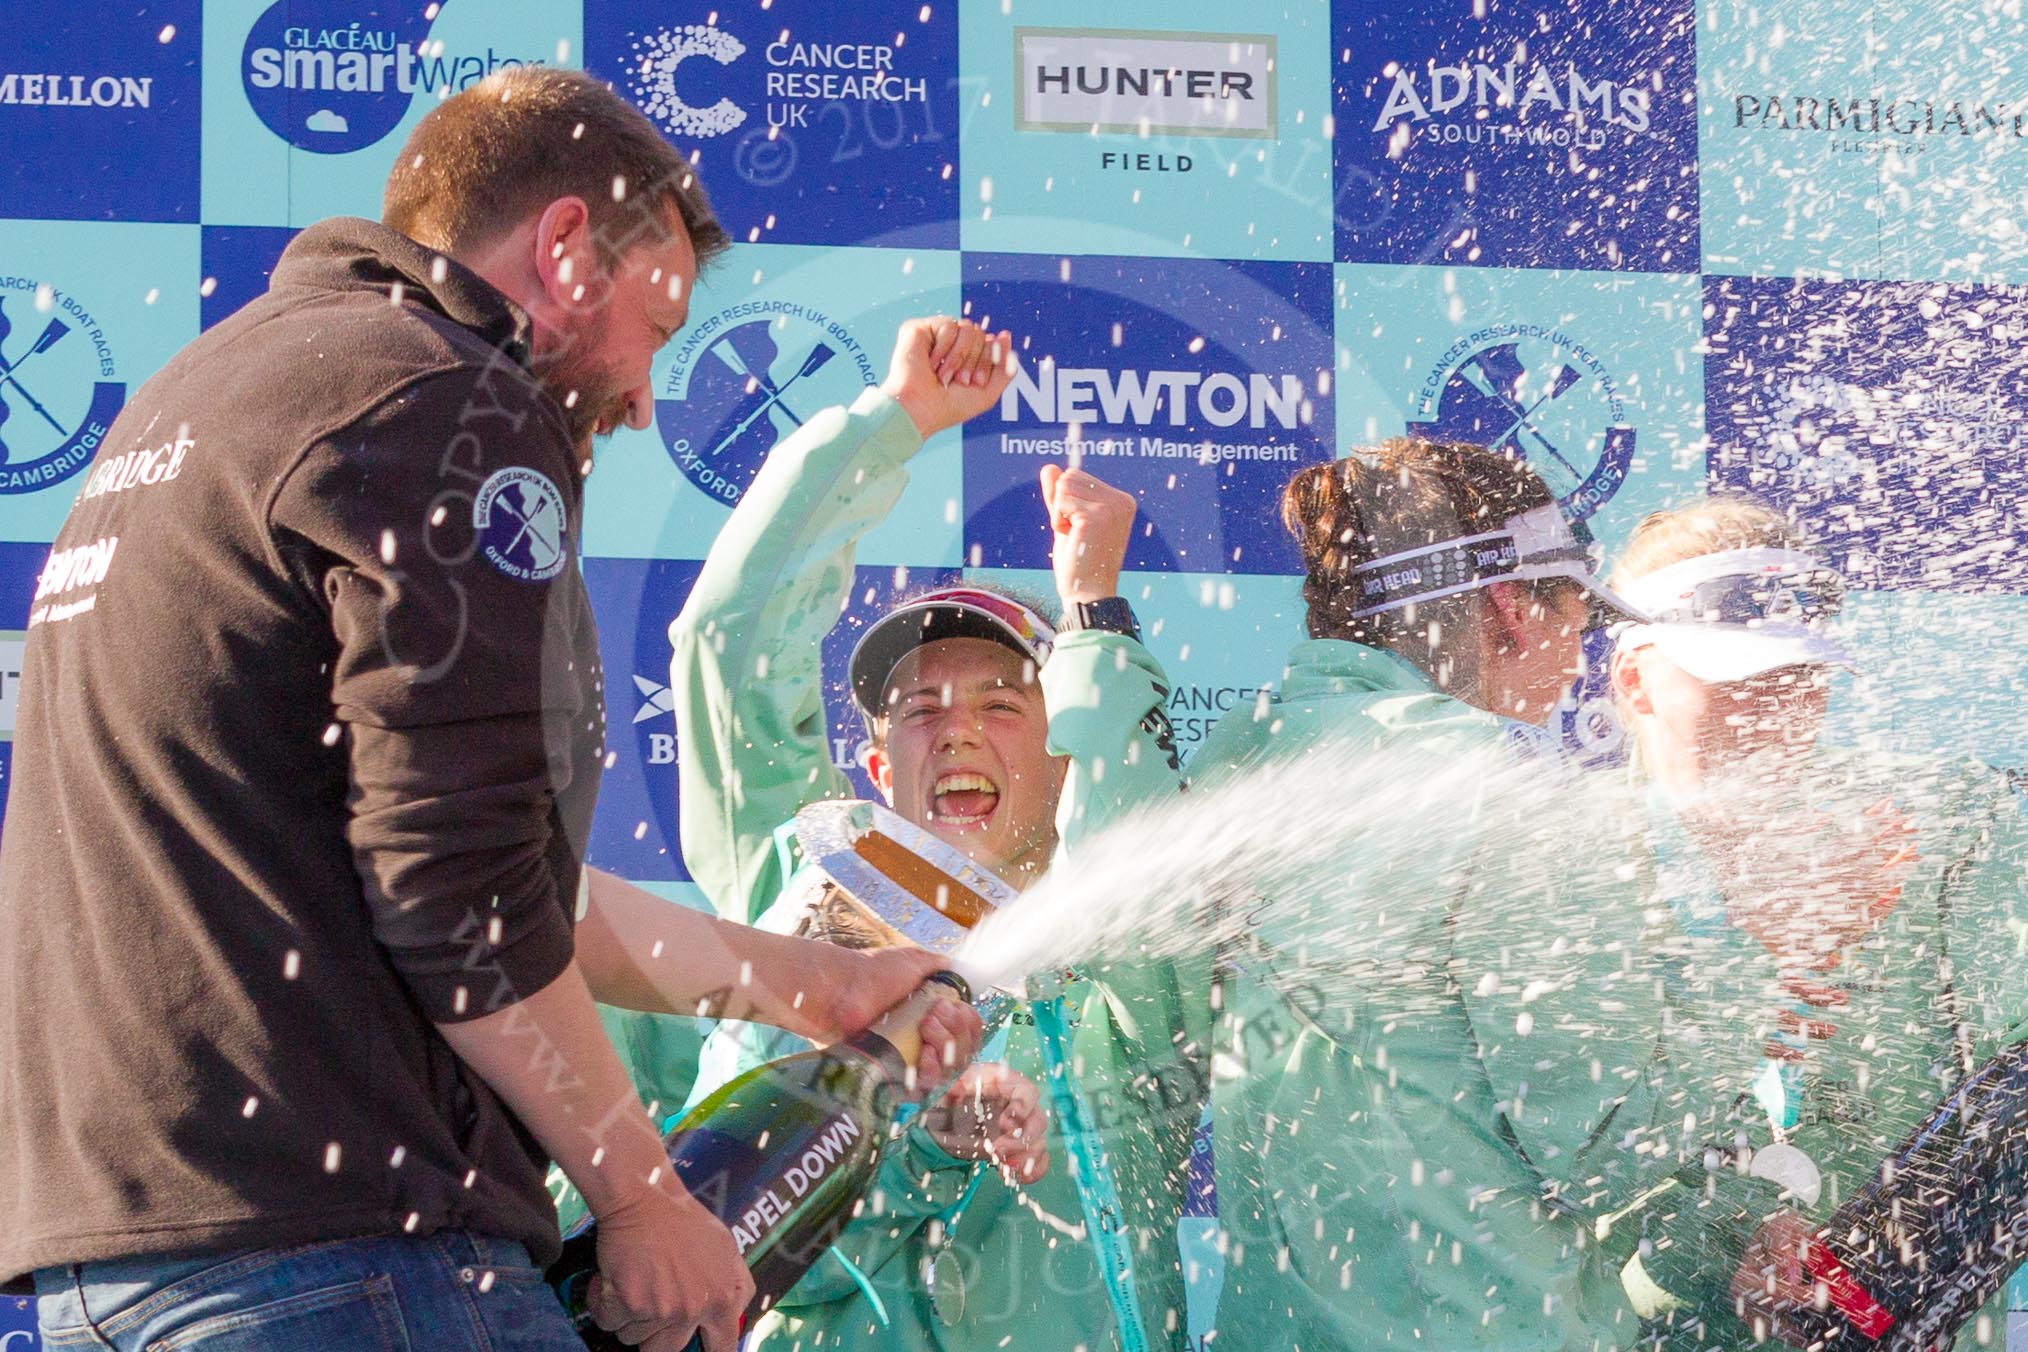 The Boat Race season 2017 -  The Cancer Research Women's Boat Race: CUWBC head coach Rob Barker spraying Champagne at the crew, on his right cox Matthew Holland.
River Thames between Putney Bridge and Mortlake,
London SW15,

United Kingdom,
on 02 April 2017 at 17:13, image #261